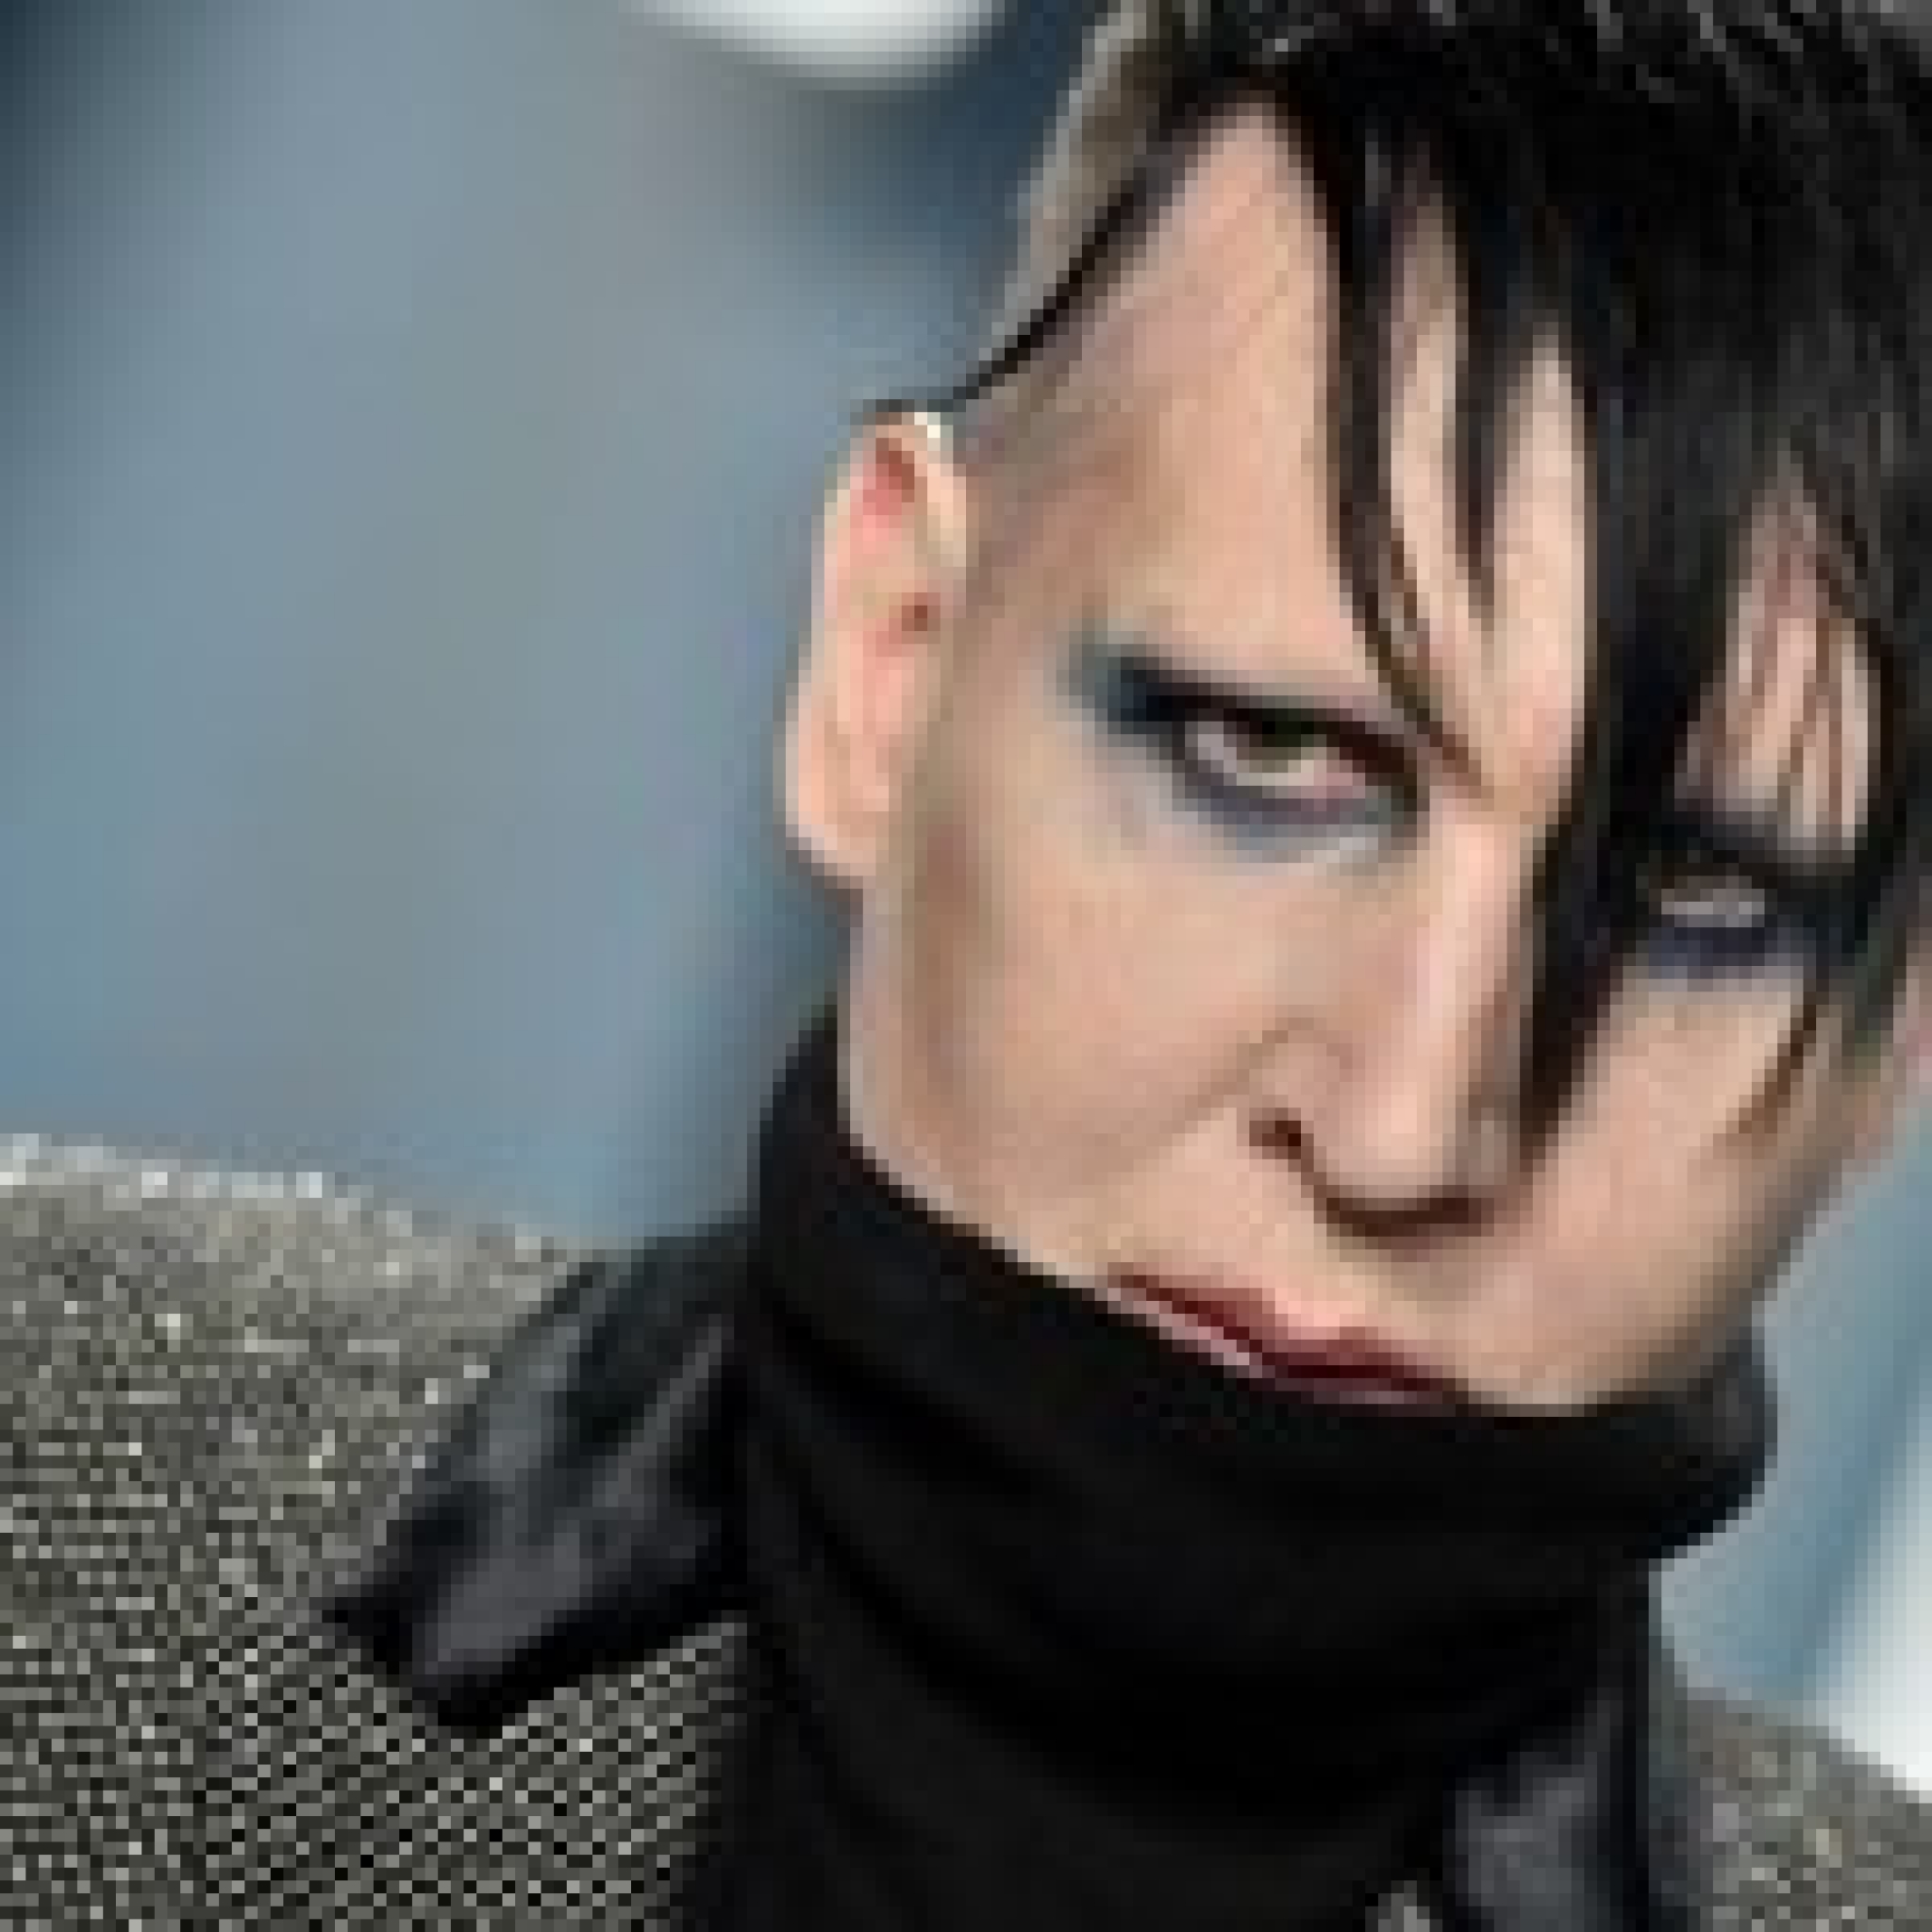 Marilyn Manson Accused of Sexual Assault, Harassment by Former Assistant: Reports